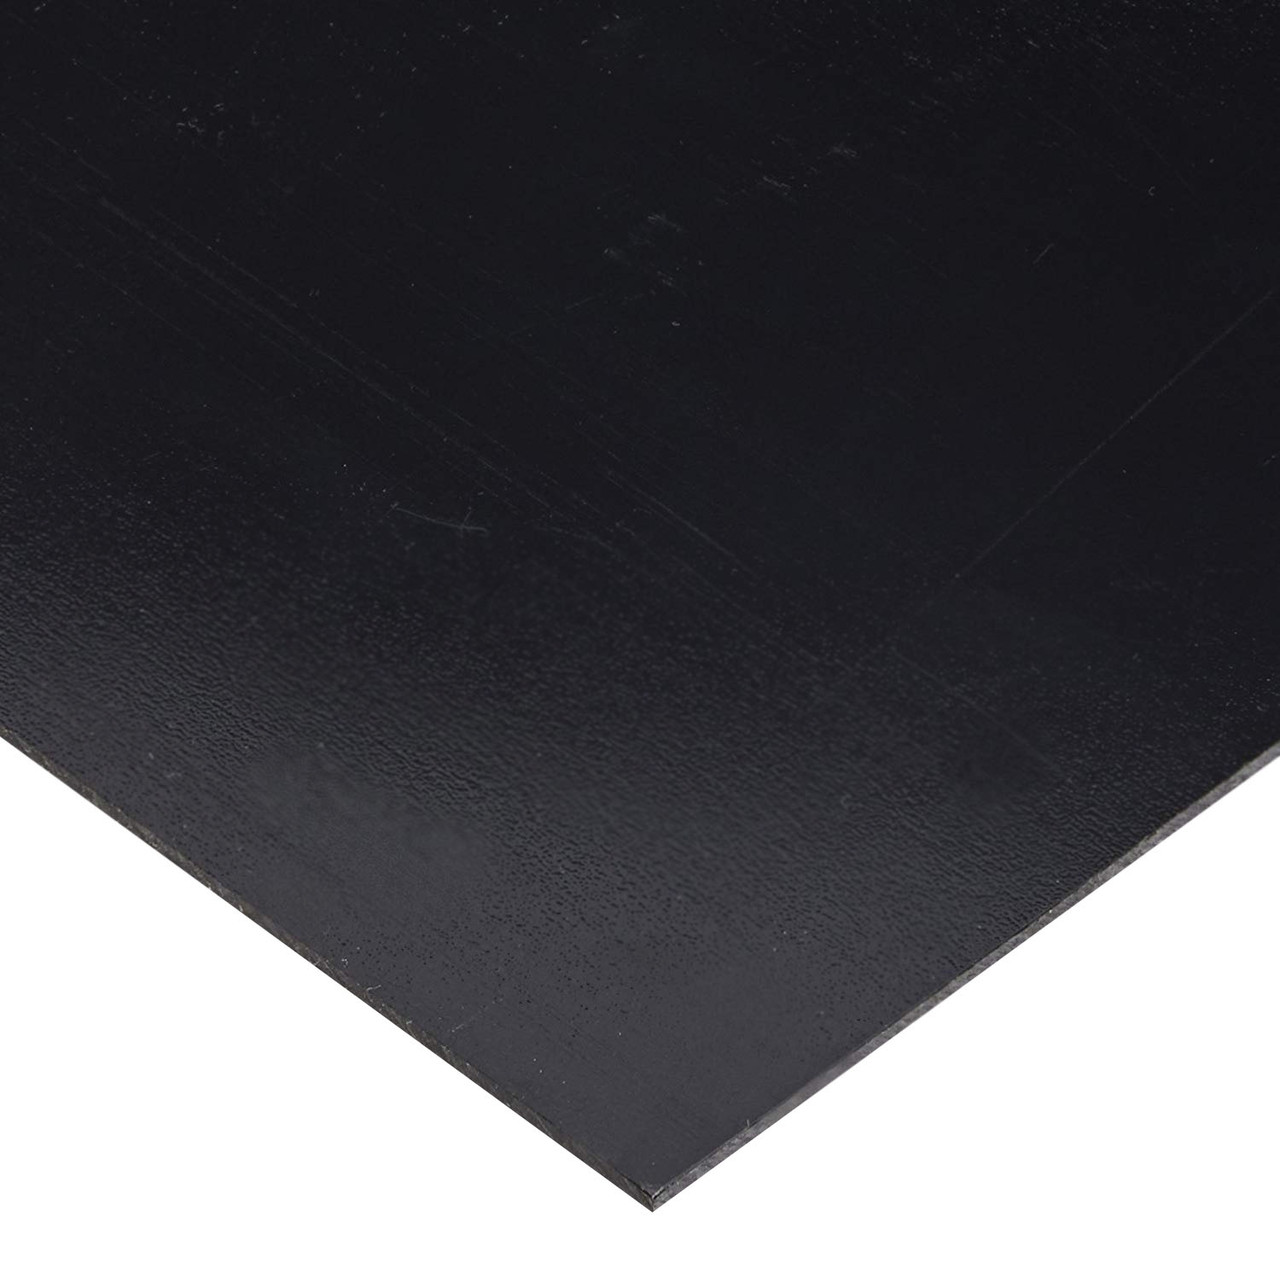 0.125" x 12" x 12", Kydex, Royalite Fire Rated Plastic Sheet, PC Level Haircell, Black